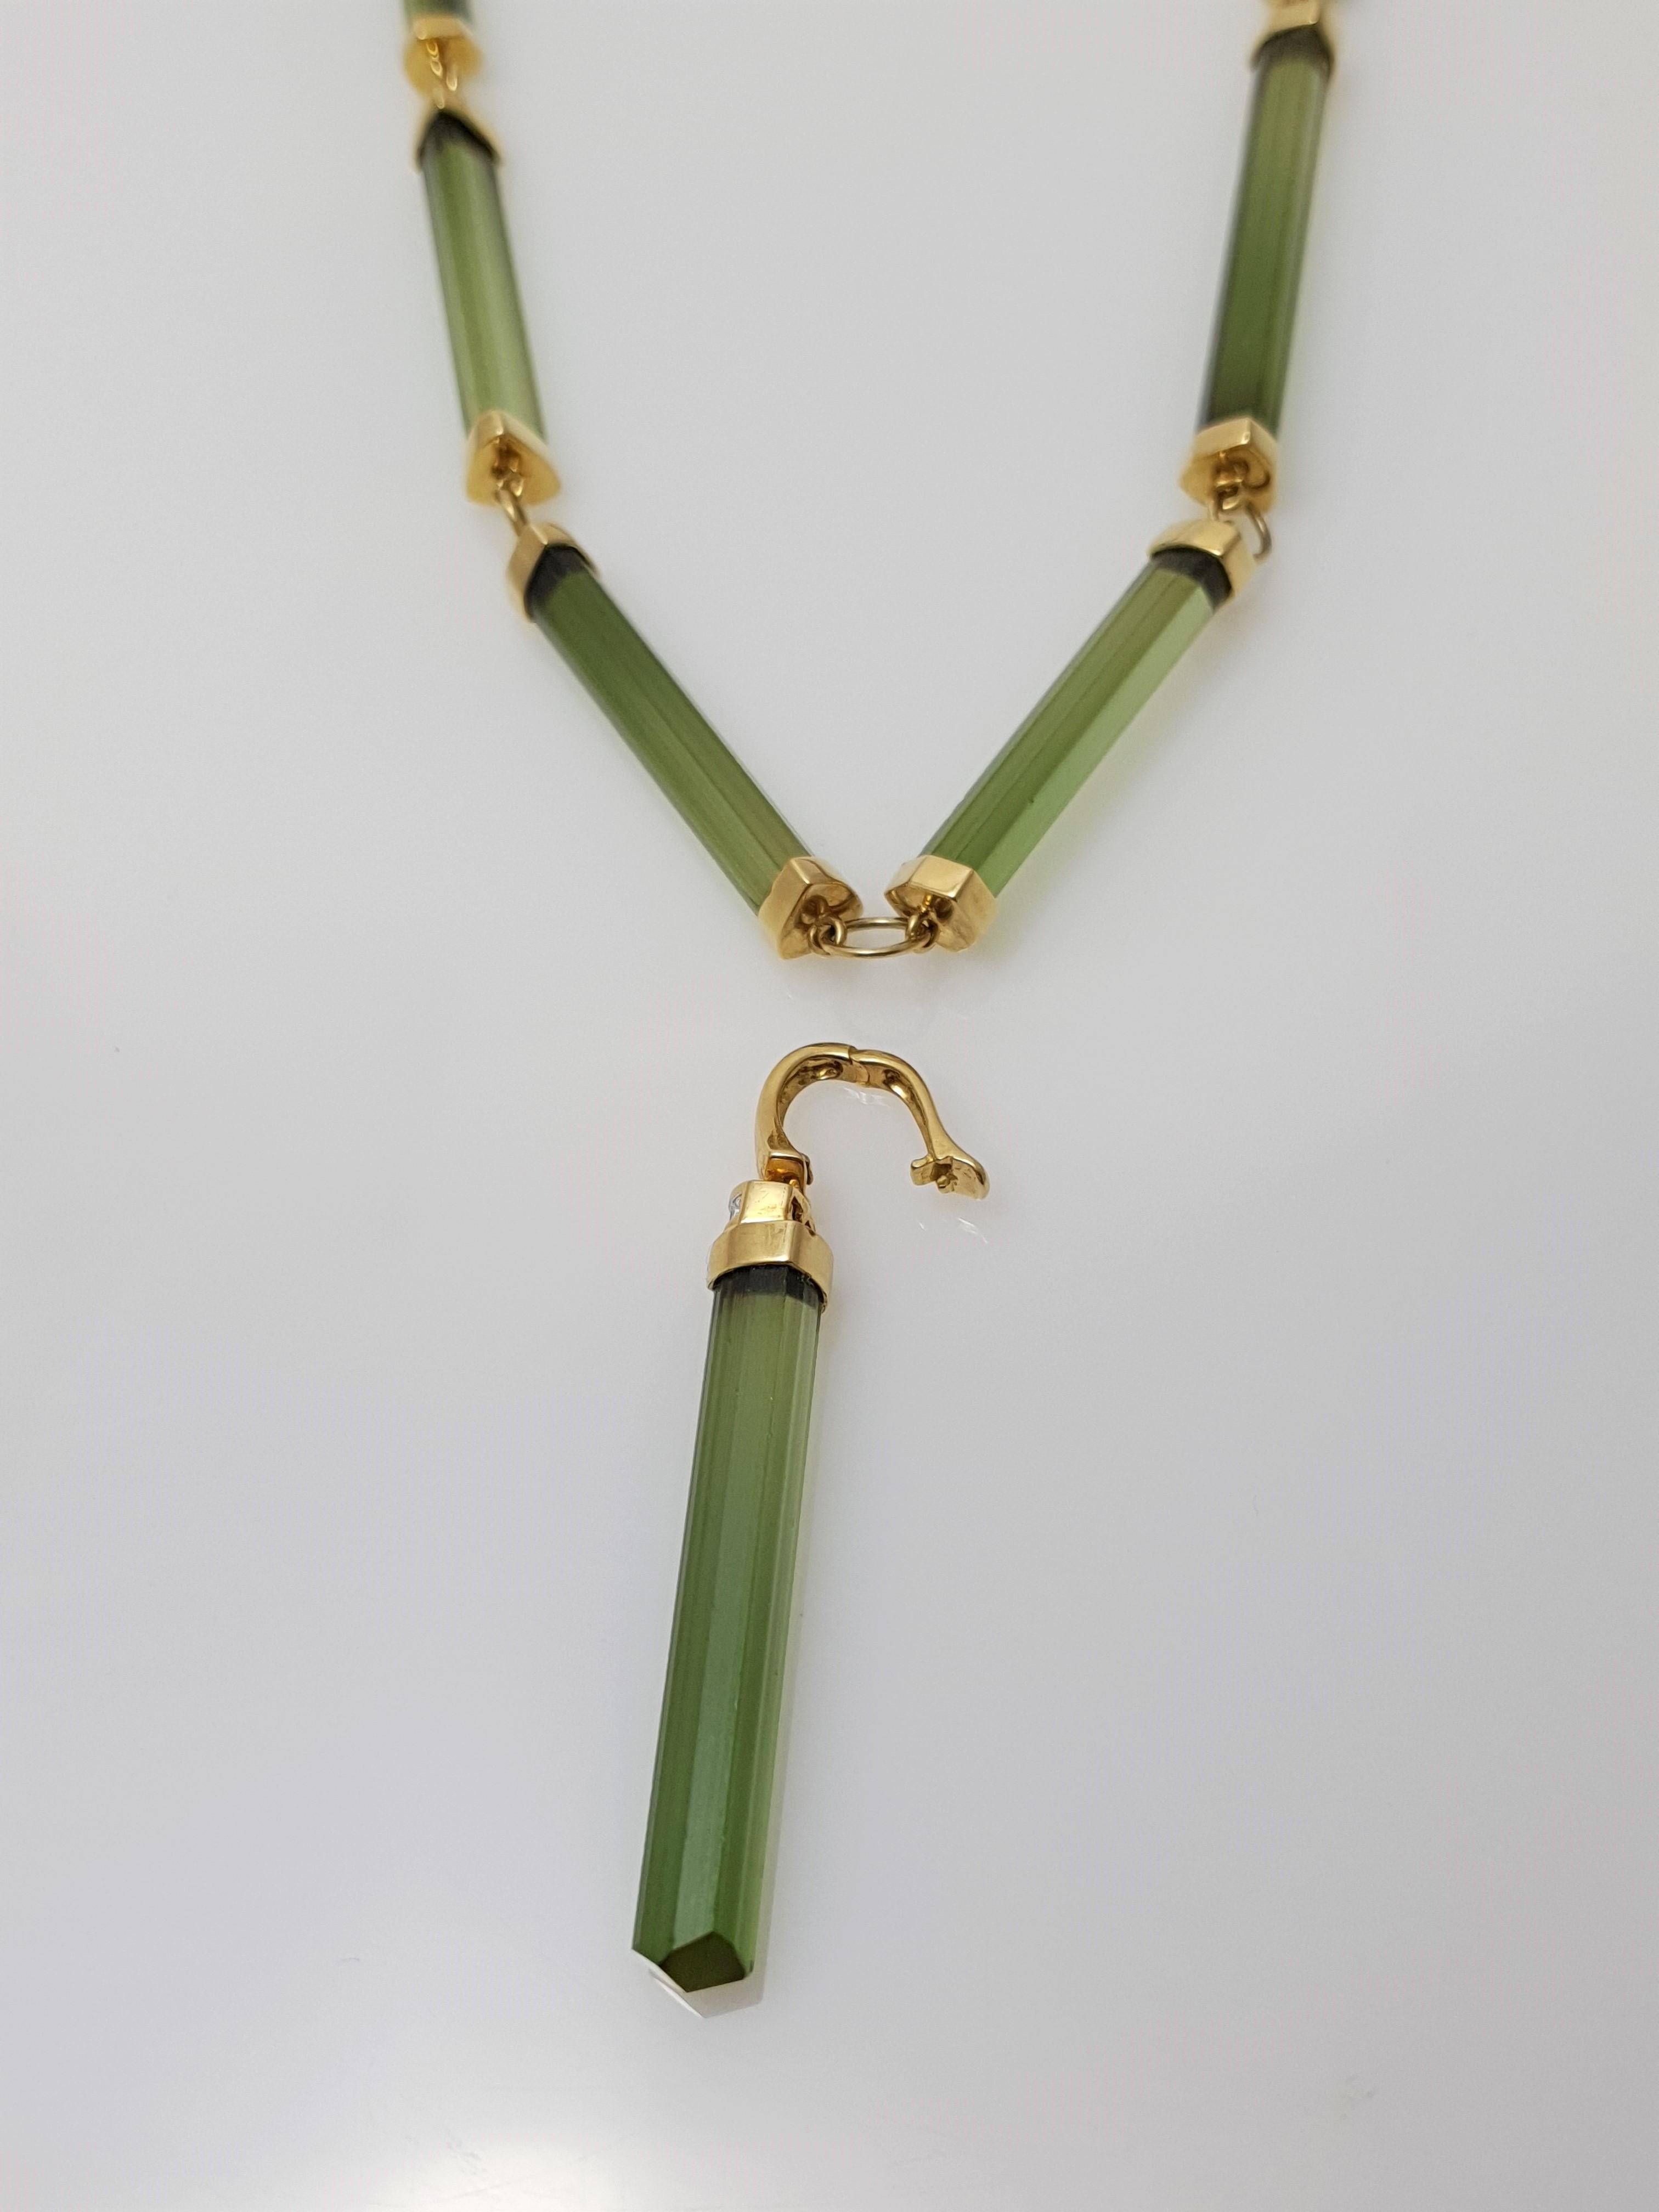 Green Tourmaline Crystal Beaded Necklace with 18 Carat Yellow Gold/Diamonds For Sale 2